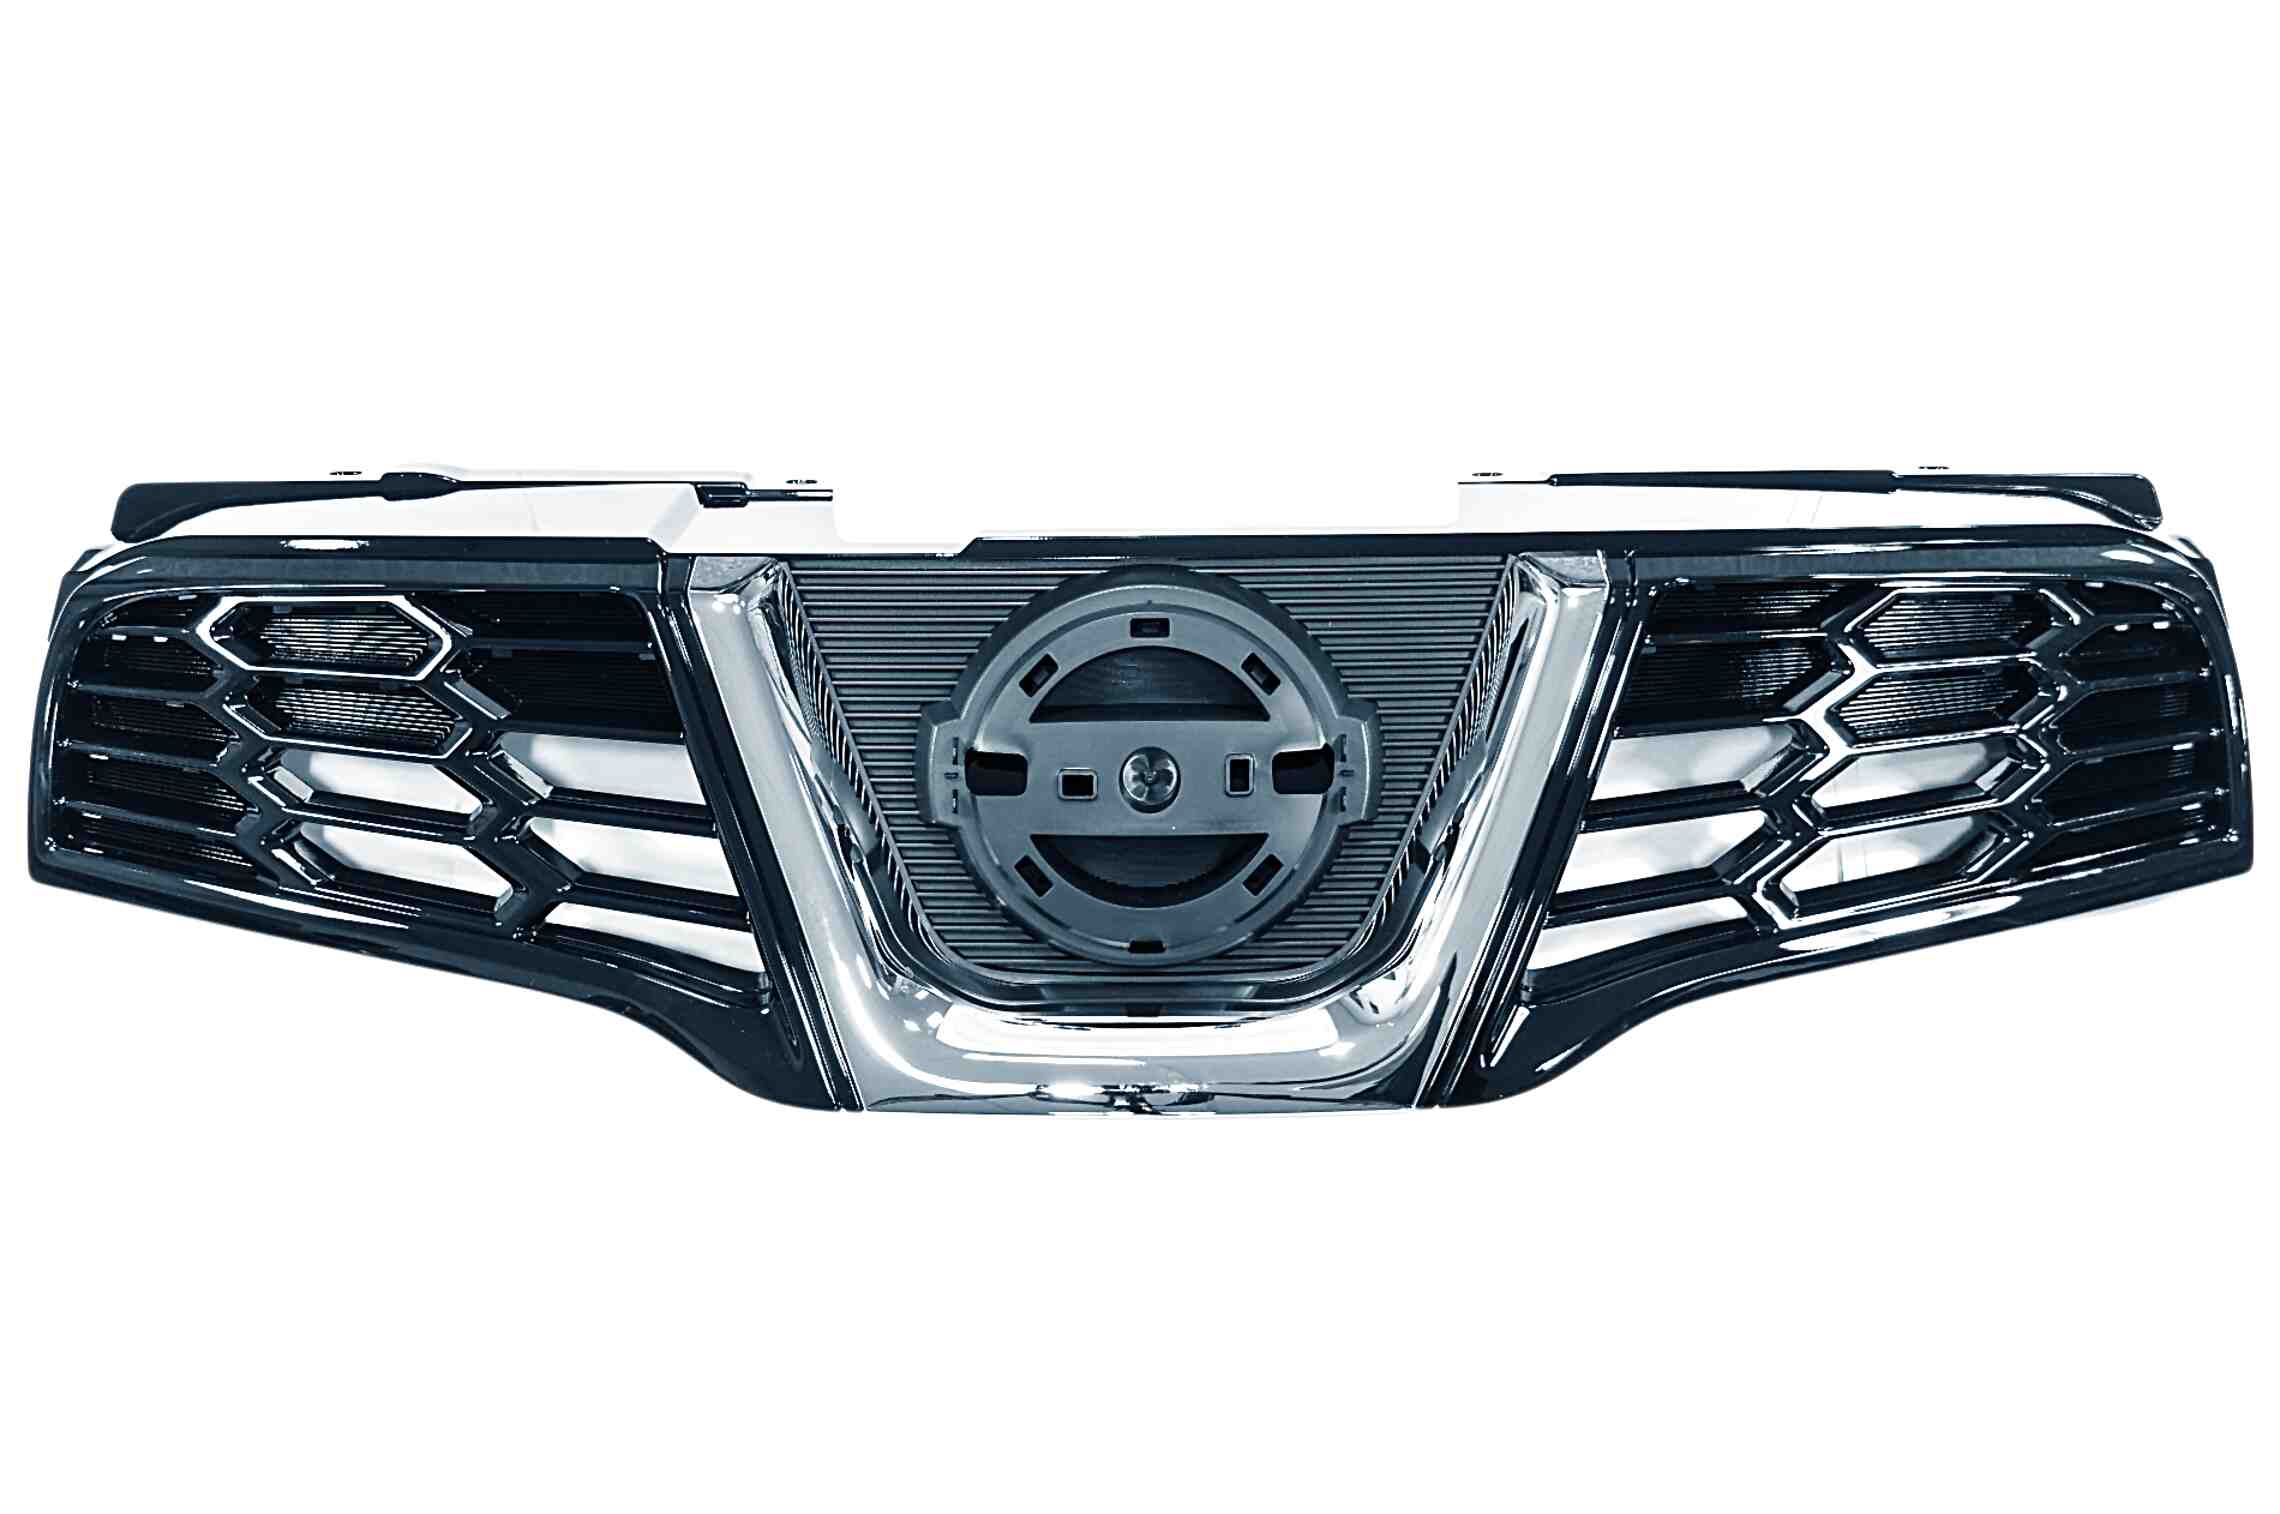 Nissan Qashqai Front Grill for sale in UK View 71 ads